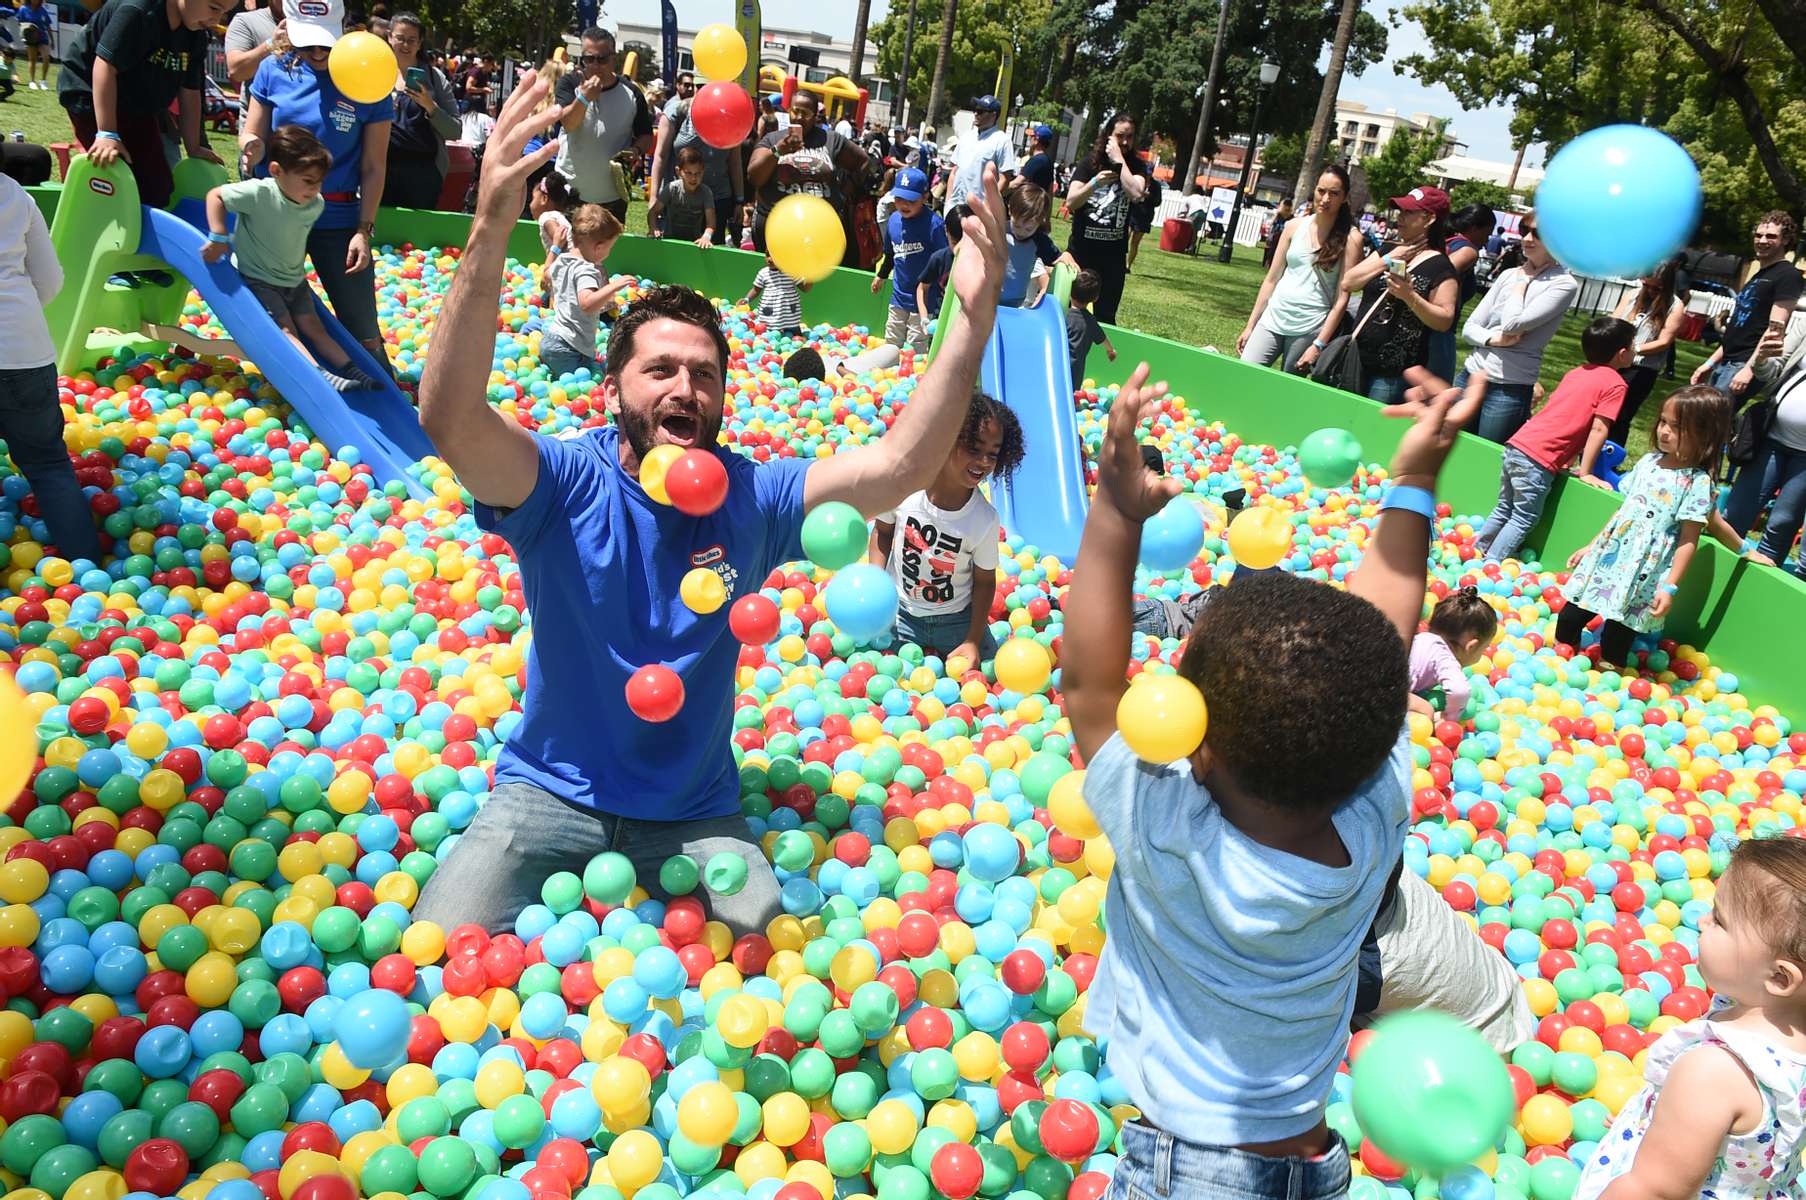 IMAGE DISTRIBUTED FOR LITTLE TIKES - Brett Tutor from TLC’s “Trading Spaces” hosted Little Tikes' 50th anniversary -- the World’s Biggest Play Date --  on Saturday, May 18, 2019, in Pasadena, Calif., inspiring parents and kids to play together. Little Tikes is known for such iconic childhood toys as the Turtle Sandbox, Cape Cottage Playhouse™, Jump N Slide Bouncer and Easy Store ™ 3ft Trampoline among many other toys. (Photo by Jordan Strauss/Invision for Little Tikes/AP Images)